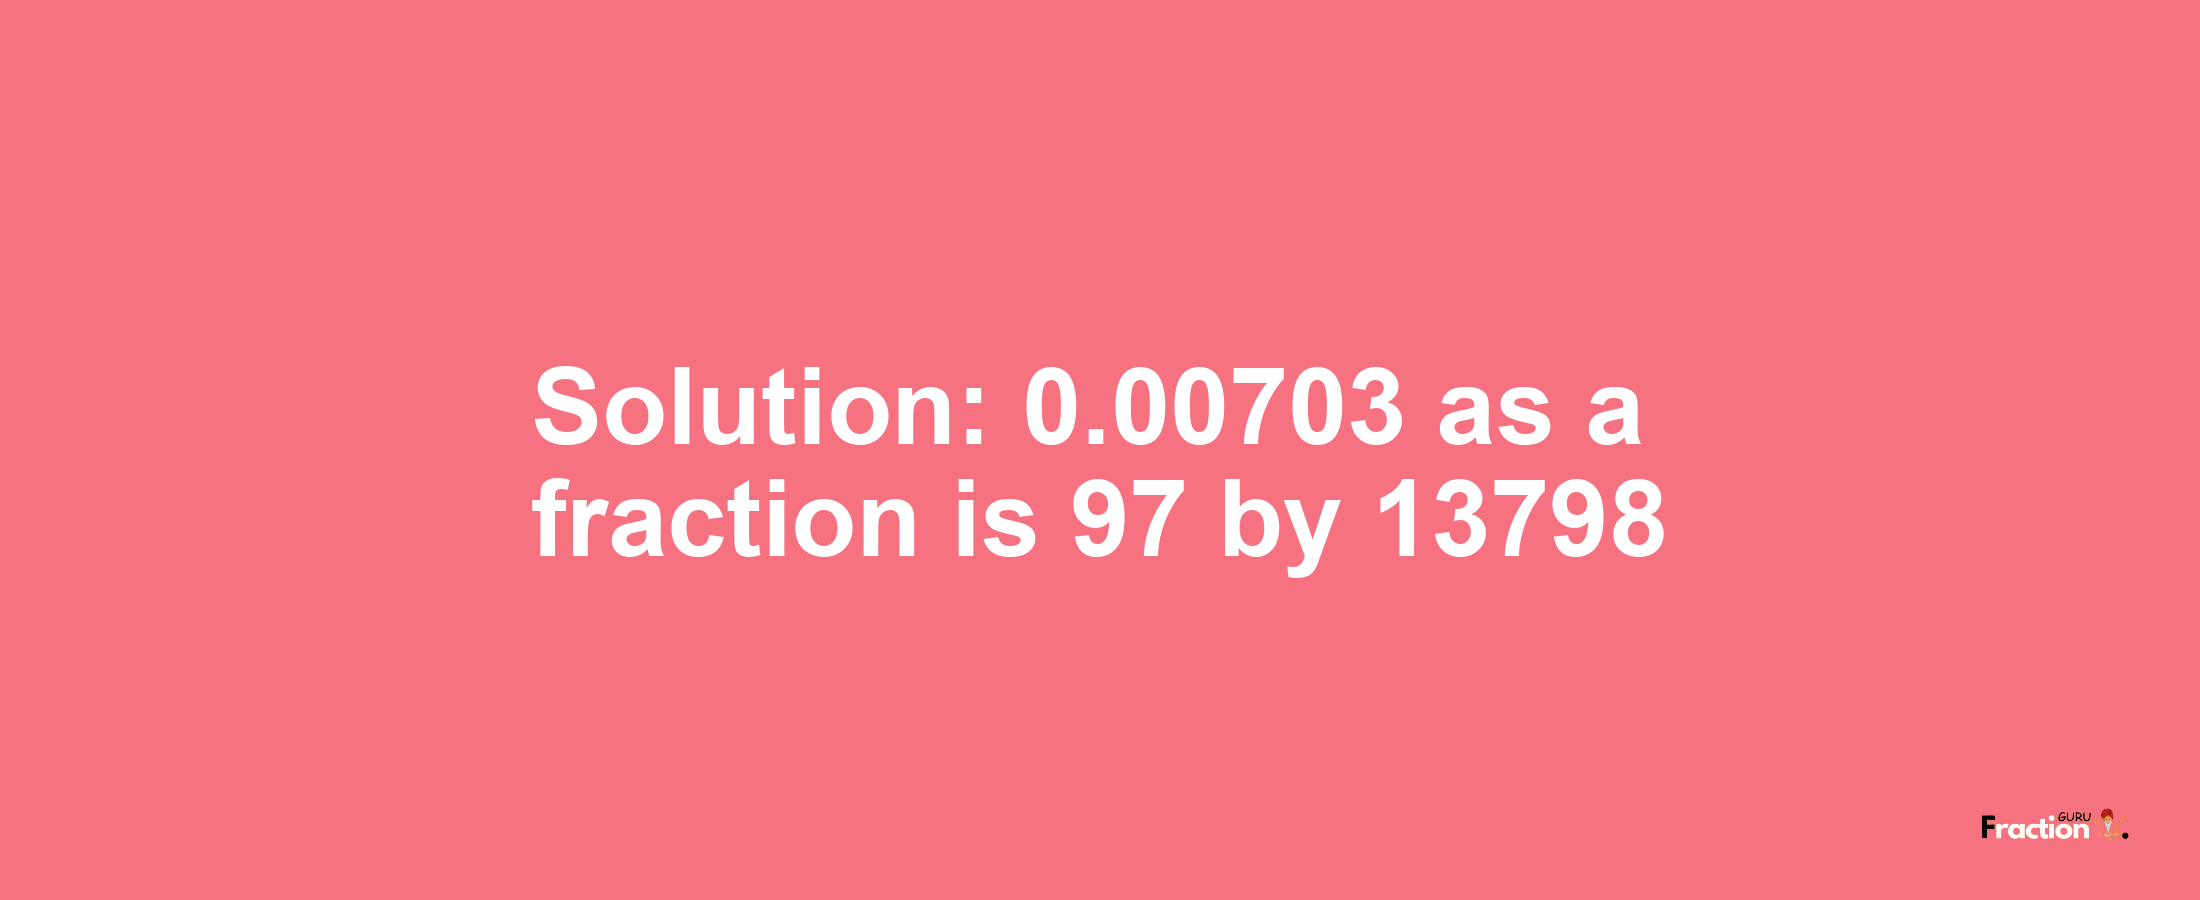 Solution:0.00703 as a fraction is 97/13798